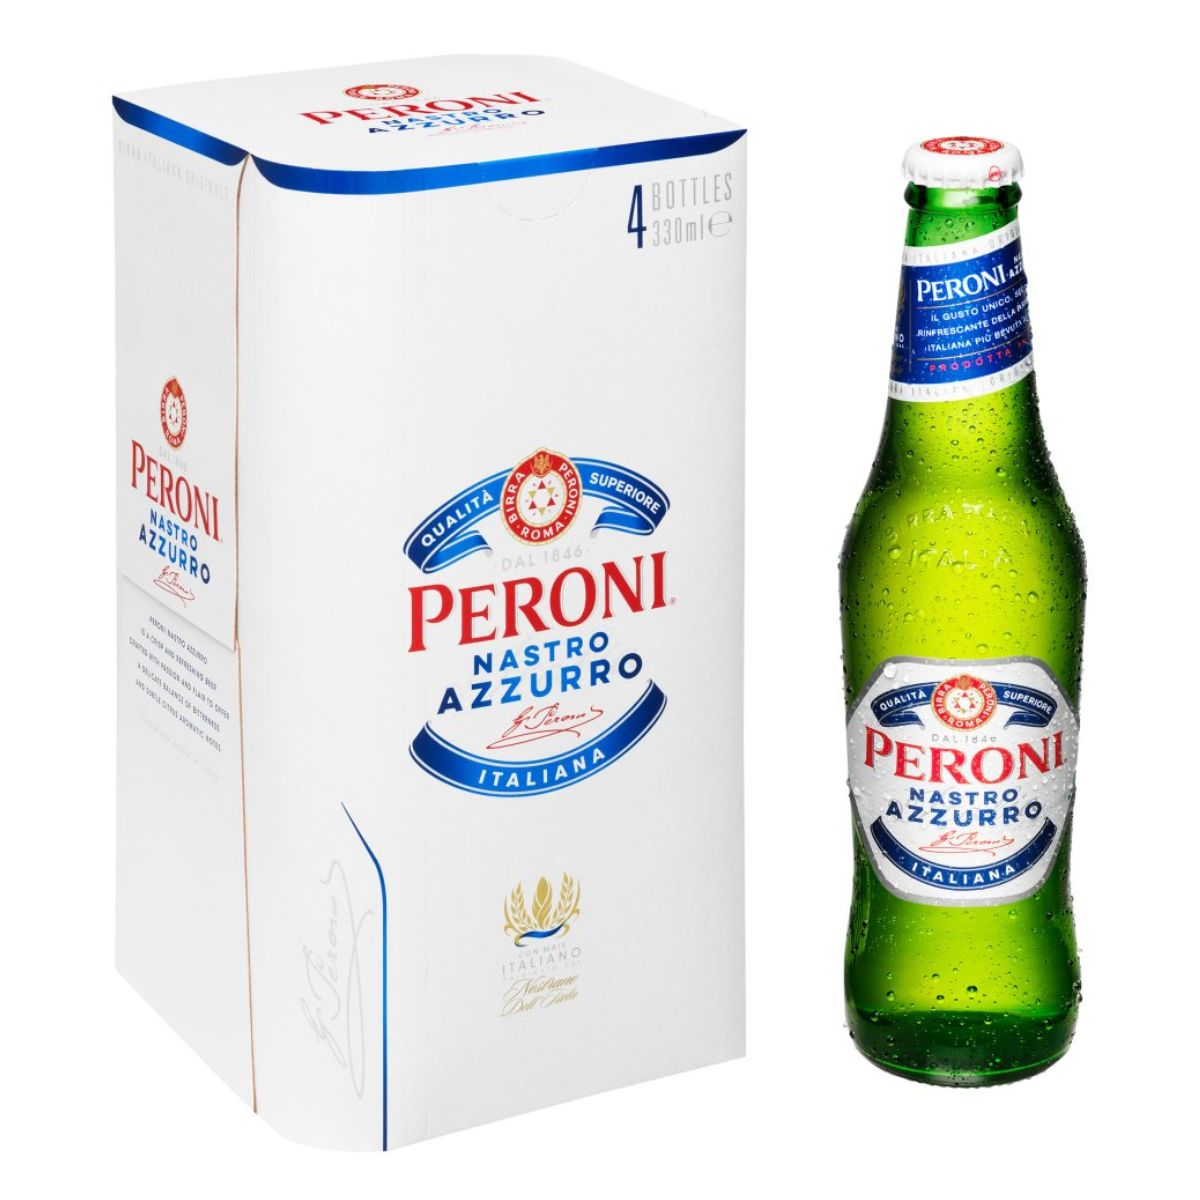 A bottle of Peroni - Nastro Azzurro Lager Beer Bottle (5.0% ABV) - 4 x 330ml next to a box.